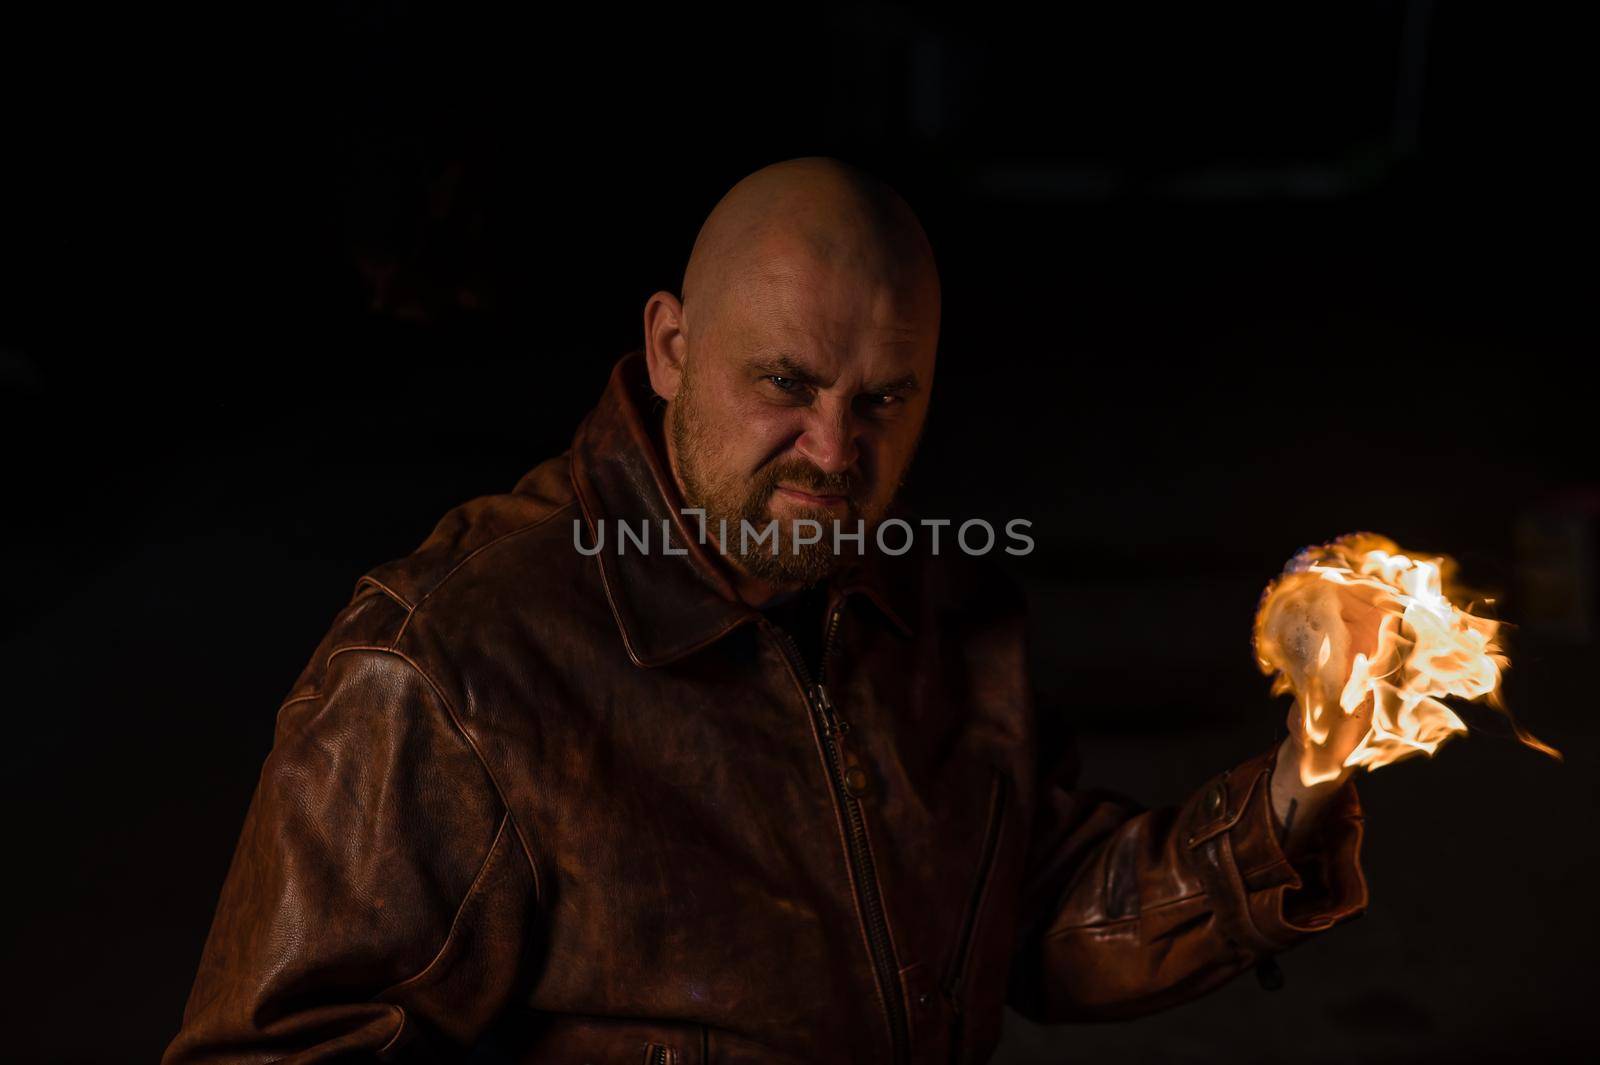 A bald man in a leather jacket holds a burning ball in his hand. by mrwed54